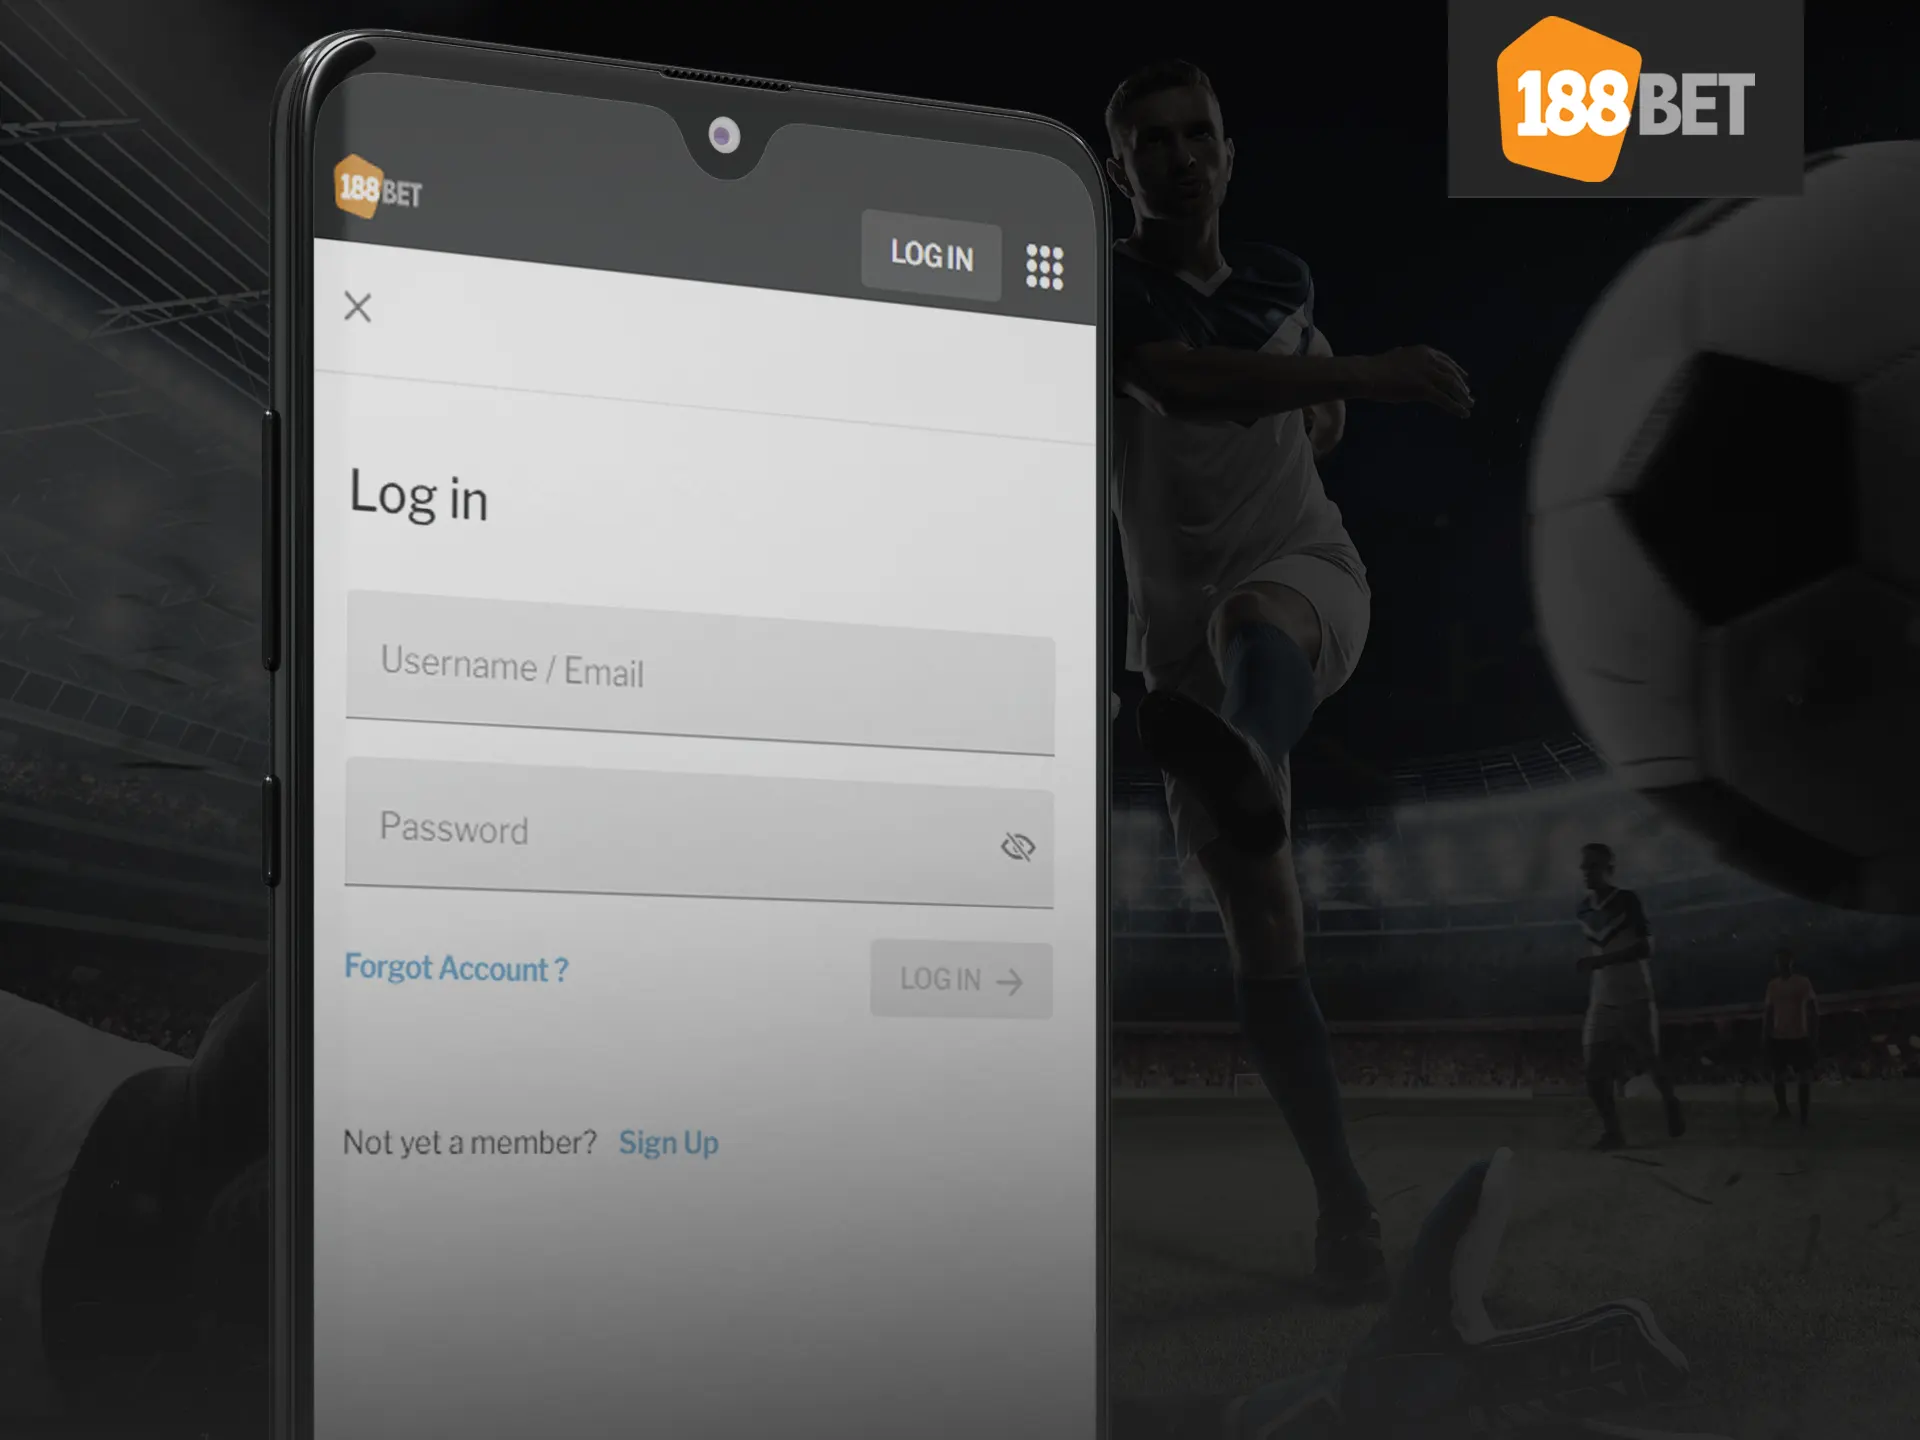 Log into your 188bet account from your mobile device.